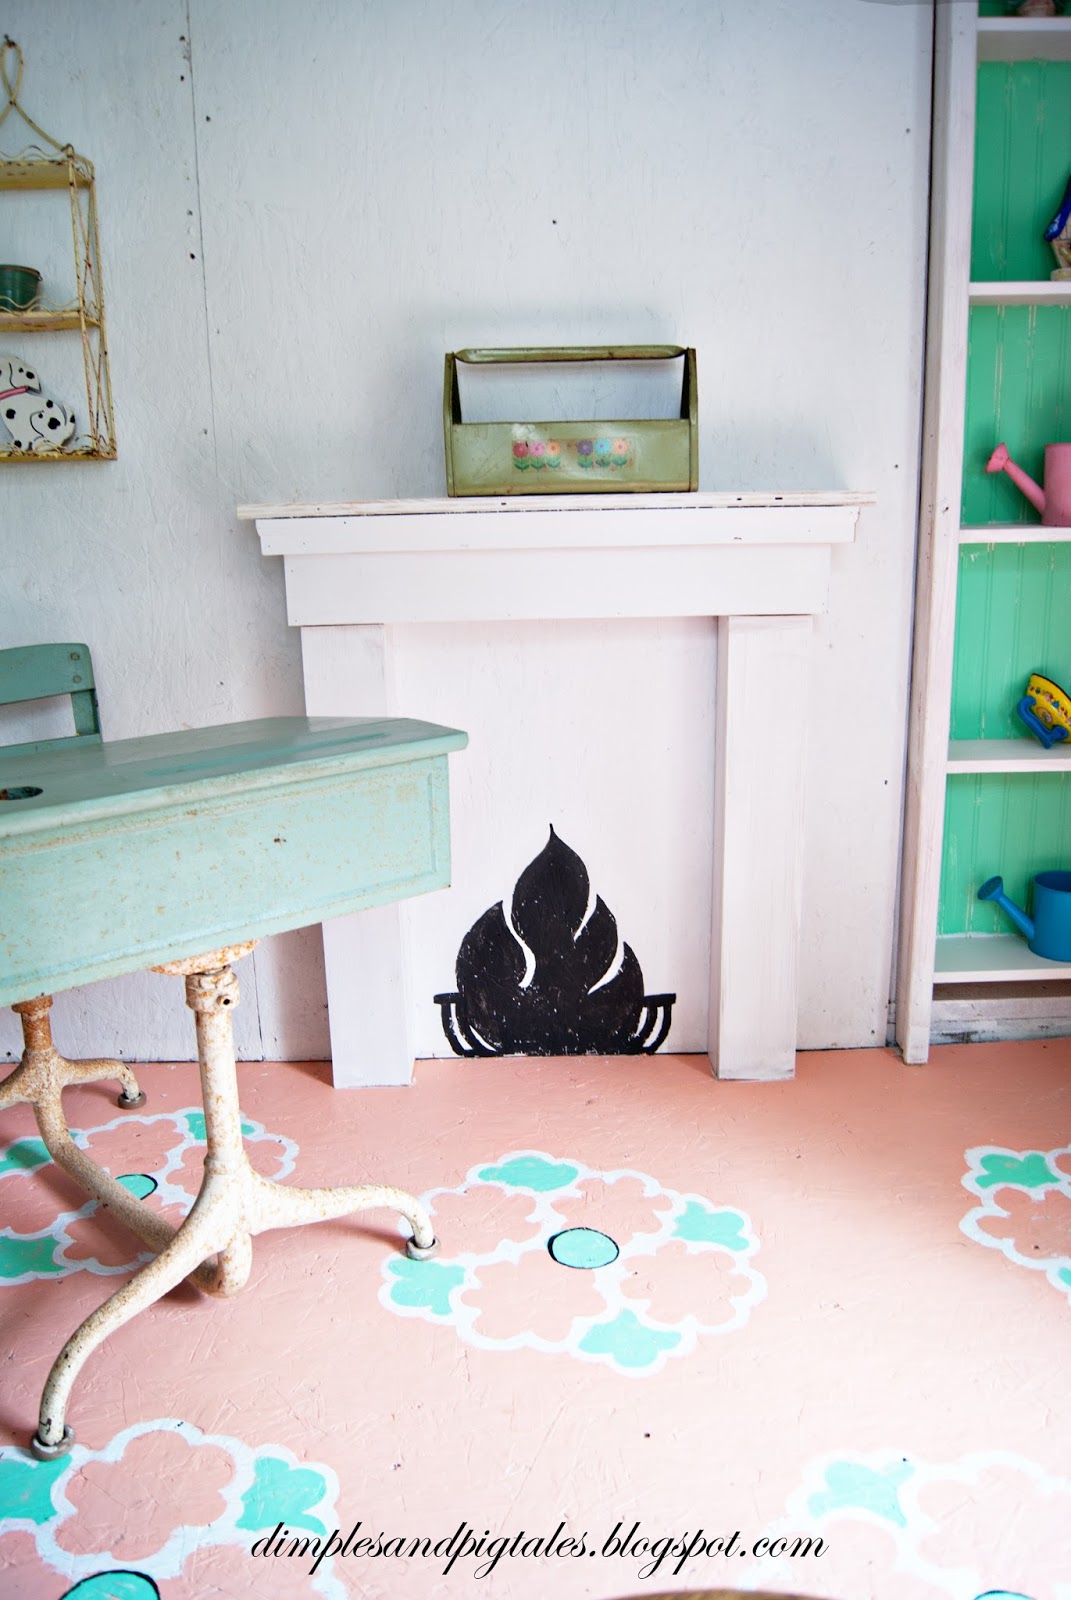 Chalkboard fireplace and vintage accessories.